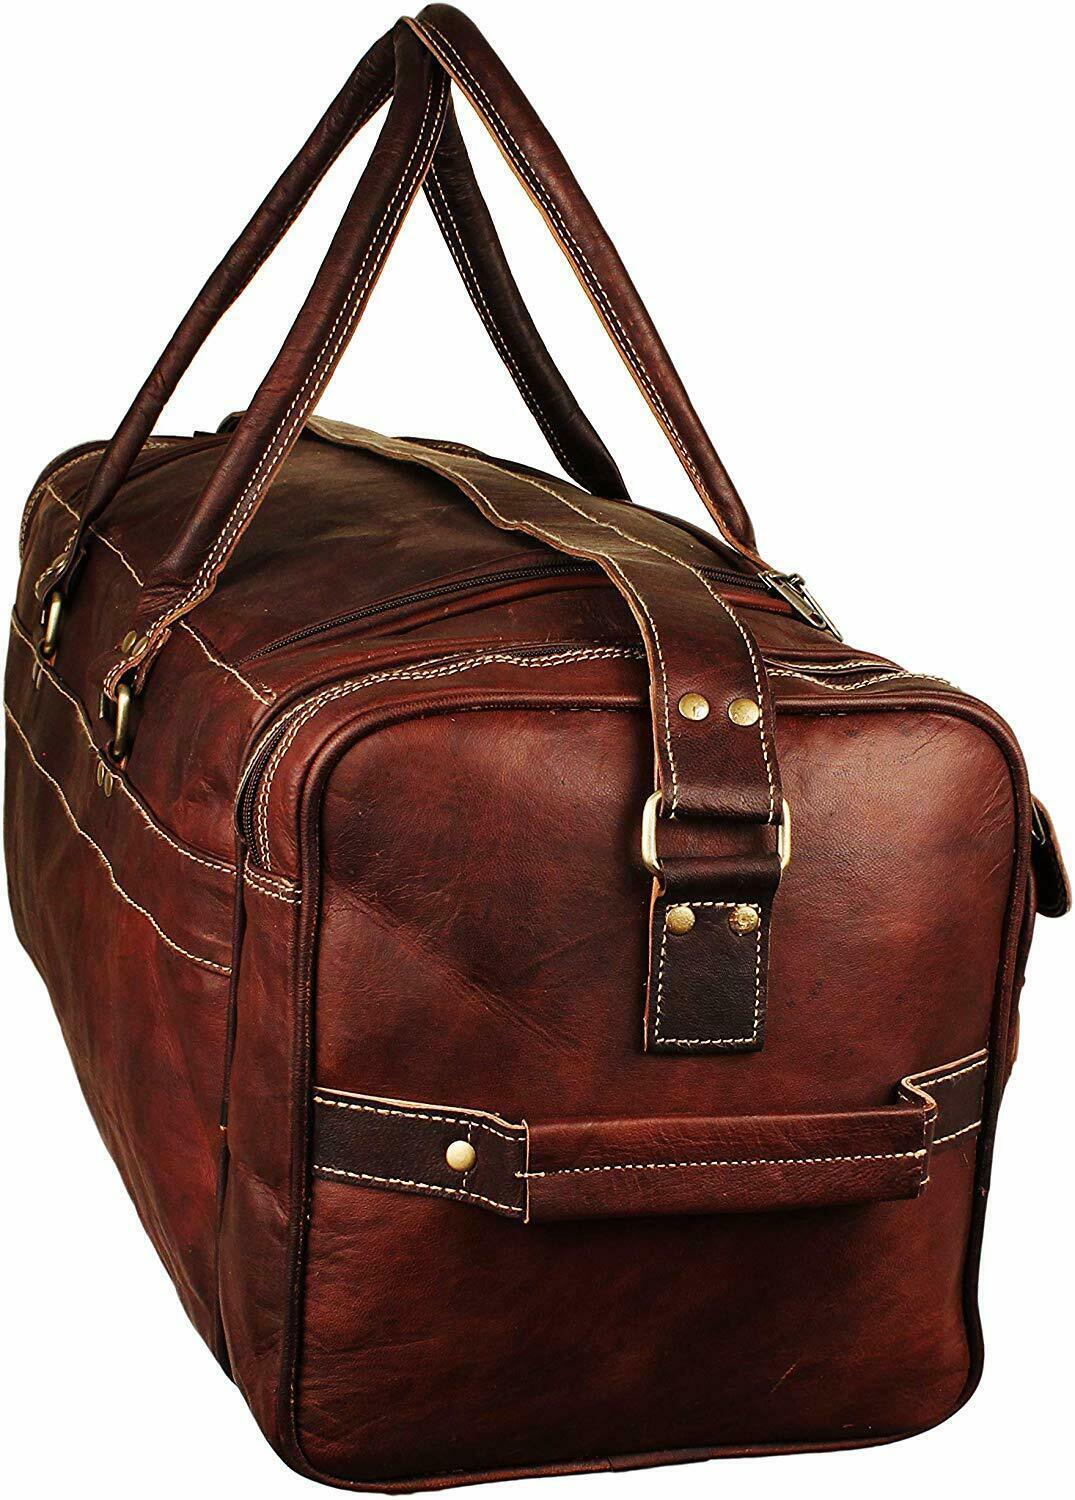 Duffel Bag Over-sized Genuine Leather Weekend Bags for Men Holdall Duffel Men - Bags